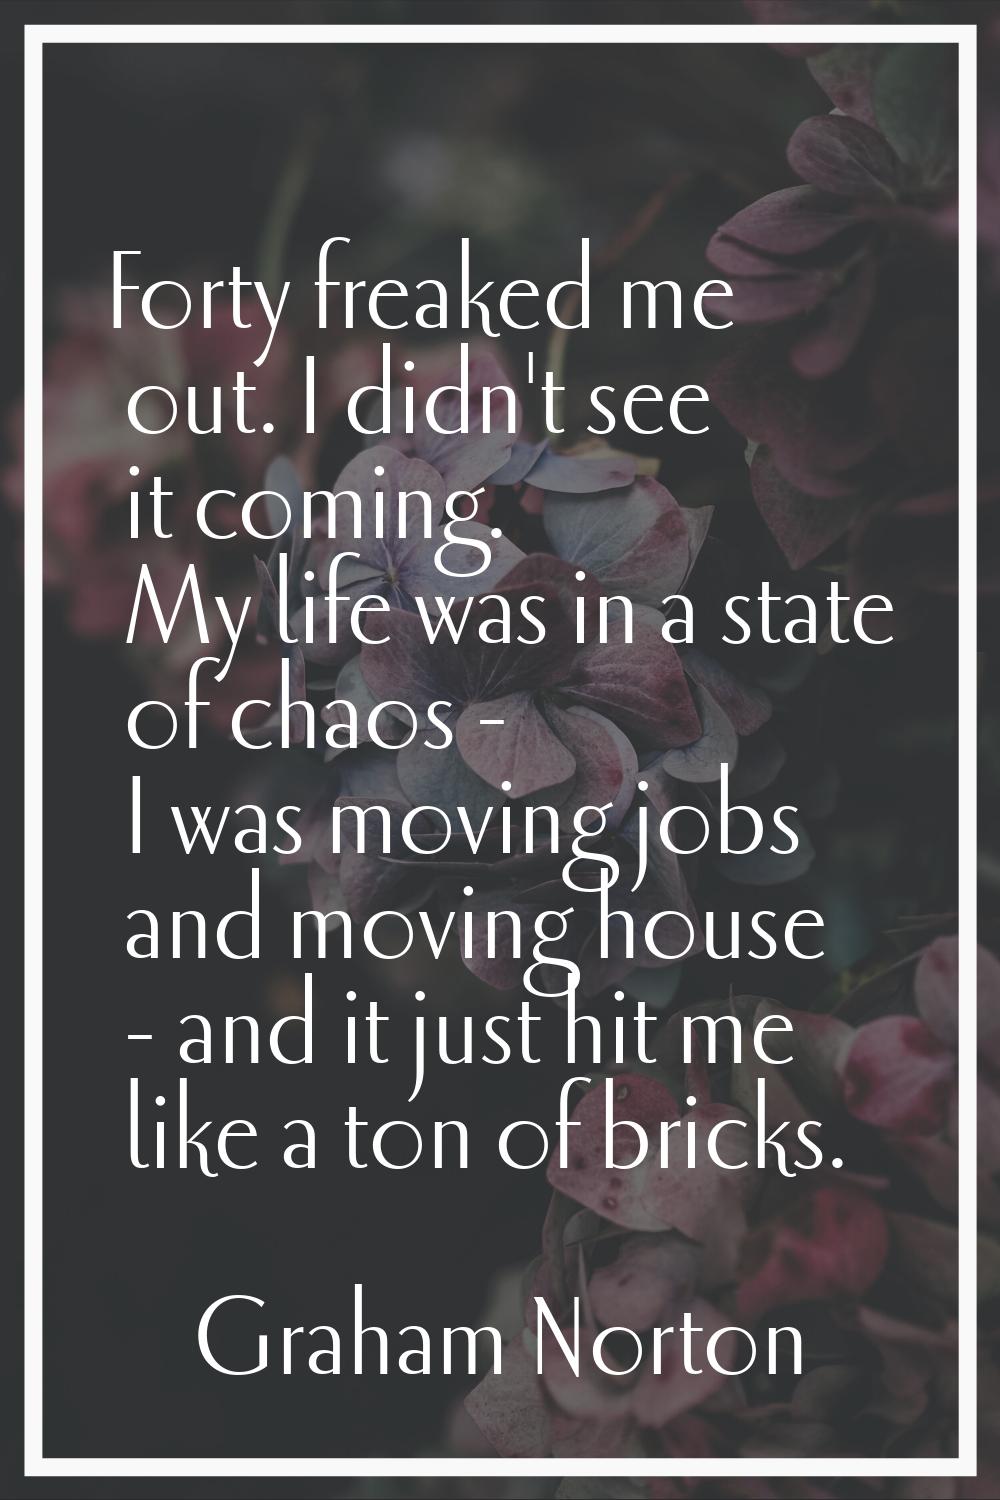 Forty freaked me out. I didn't see it coming. My life was in a state of chaos - I was moving jobs a